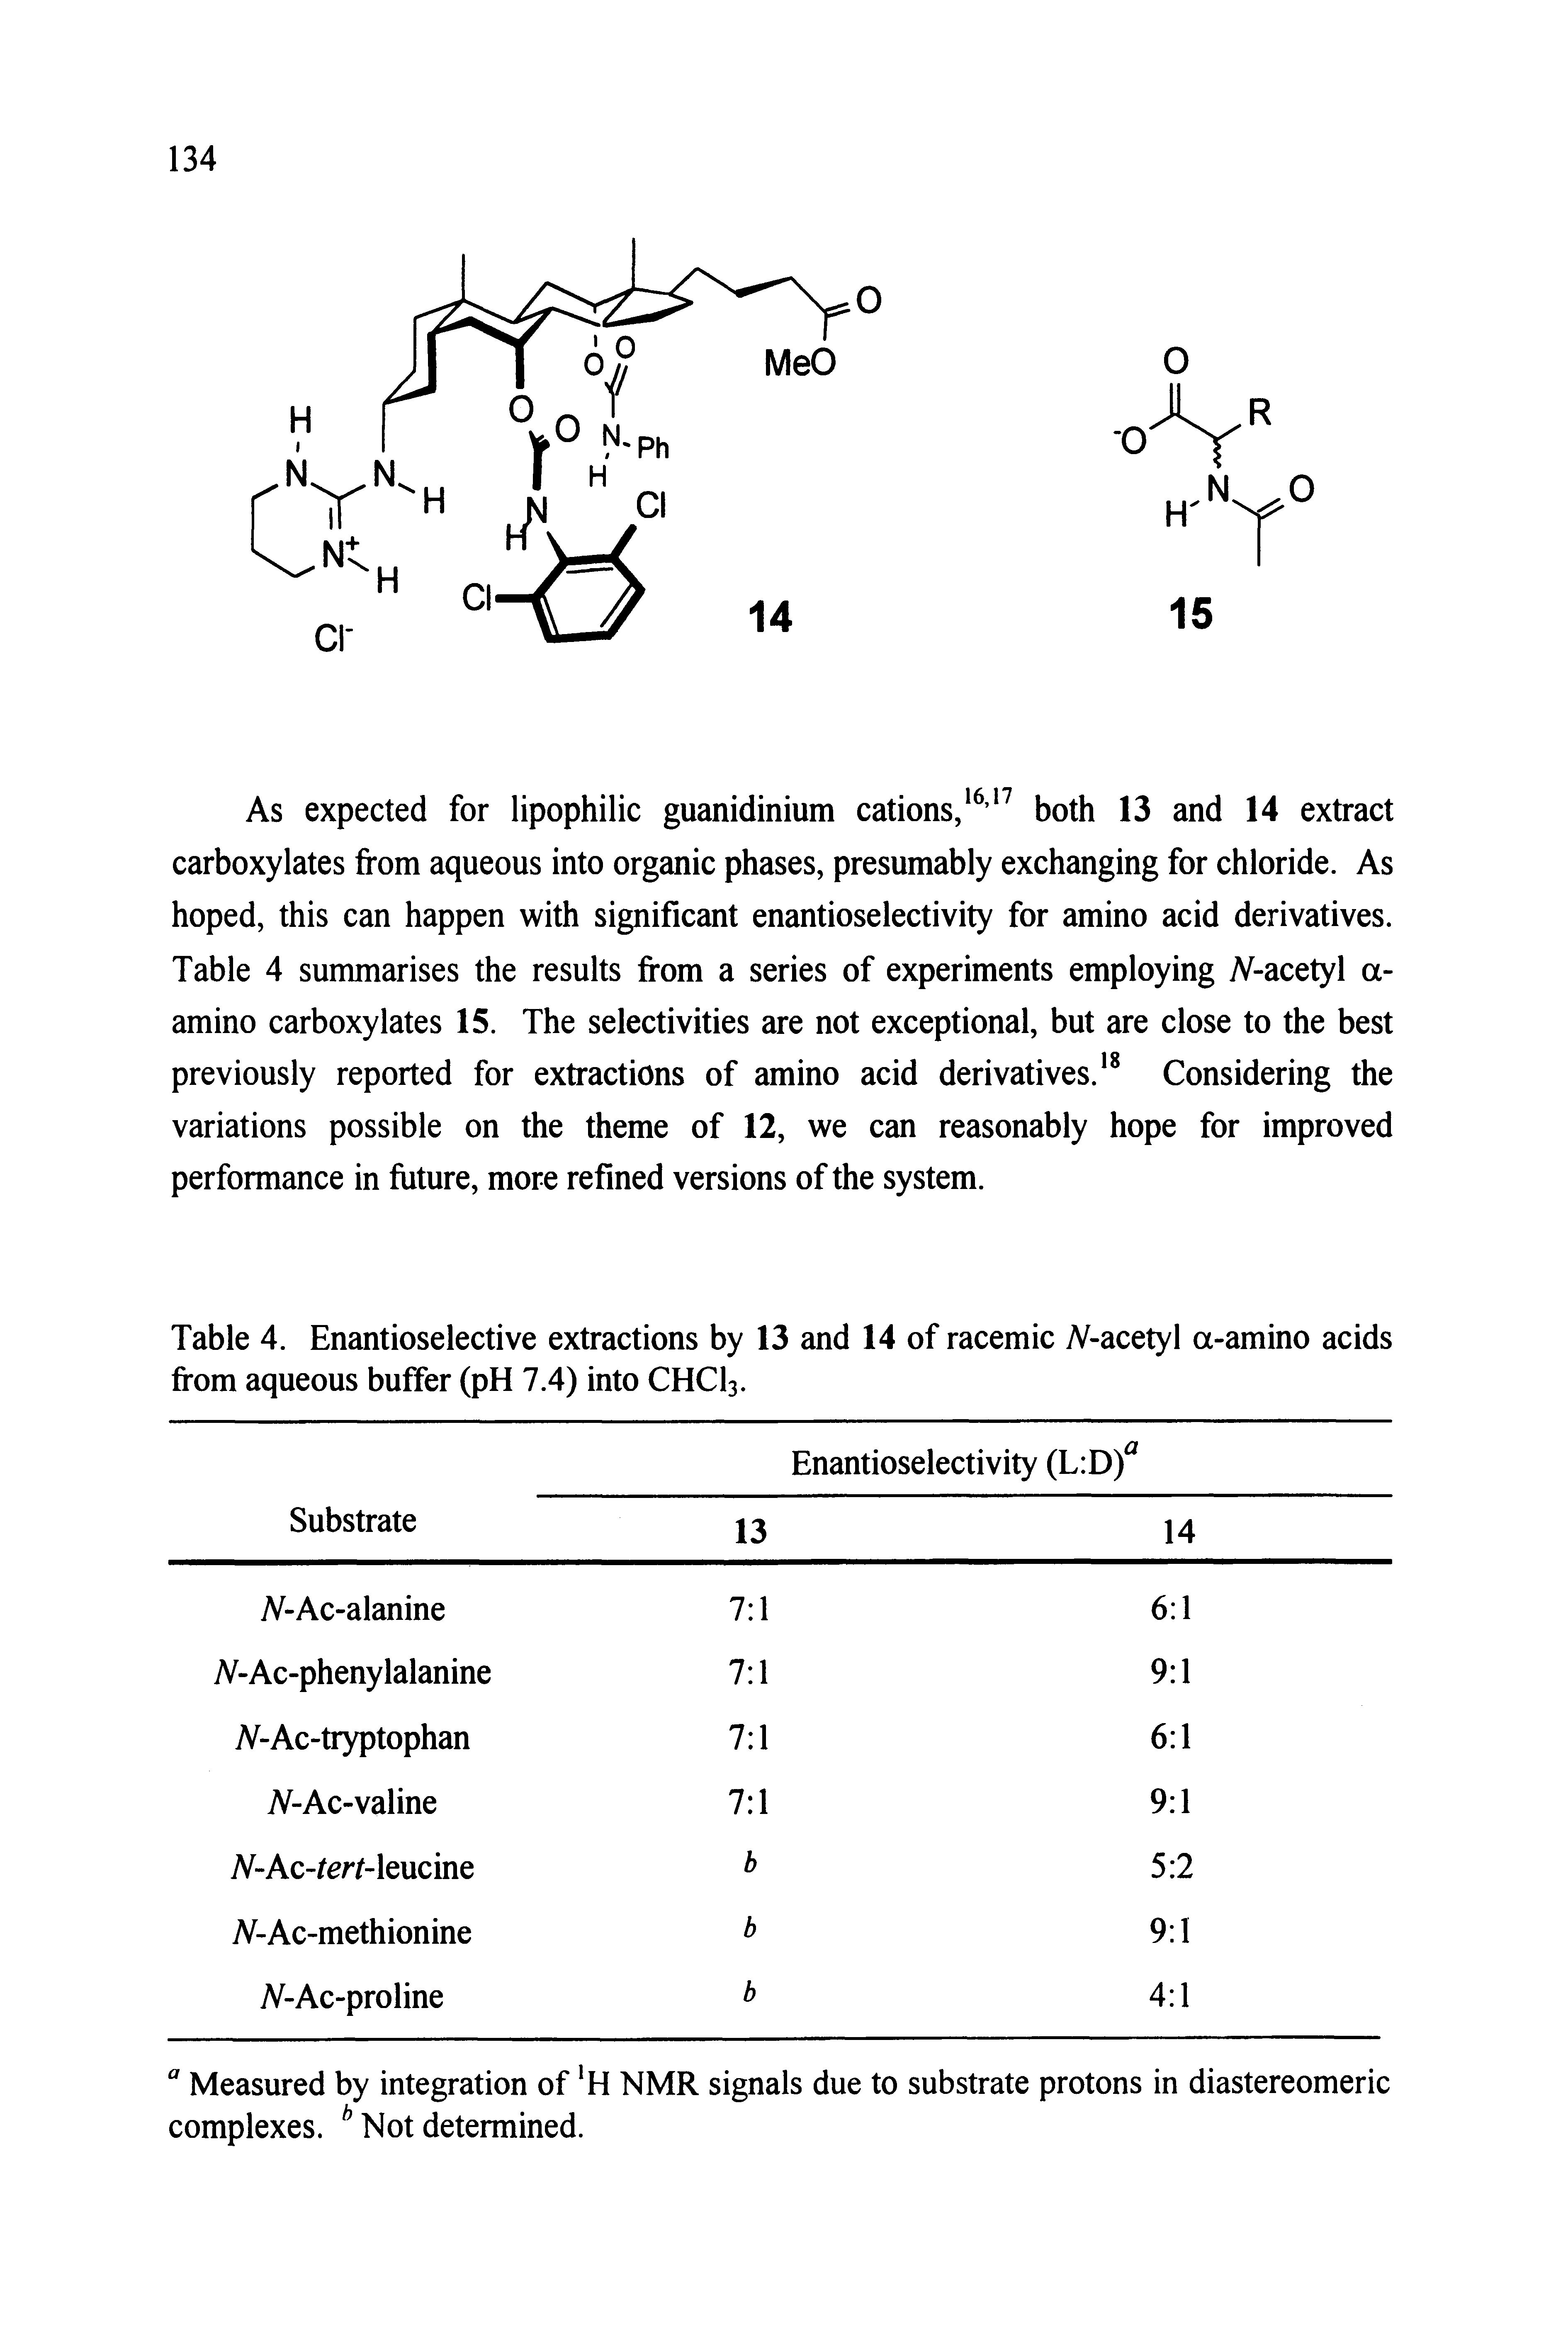 Table 4. Enantioselective extractions by 13 and 14 of racemic A -acetyl a-amino acids from aqueous buffer (pH 7.4) into CHCI3.